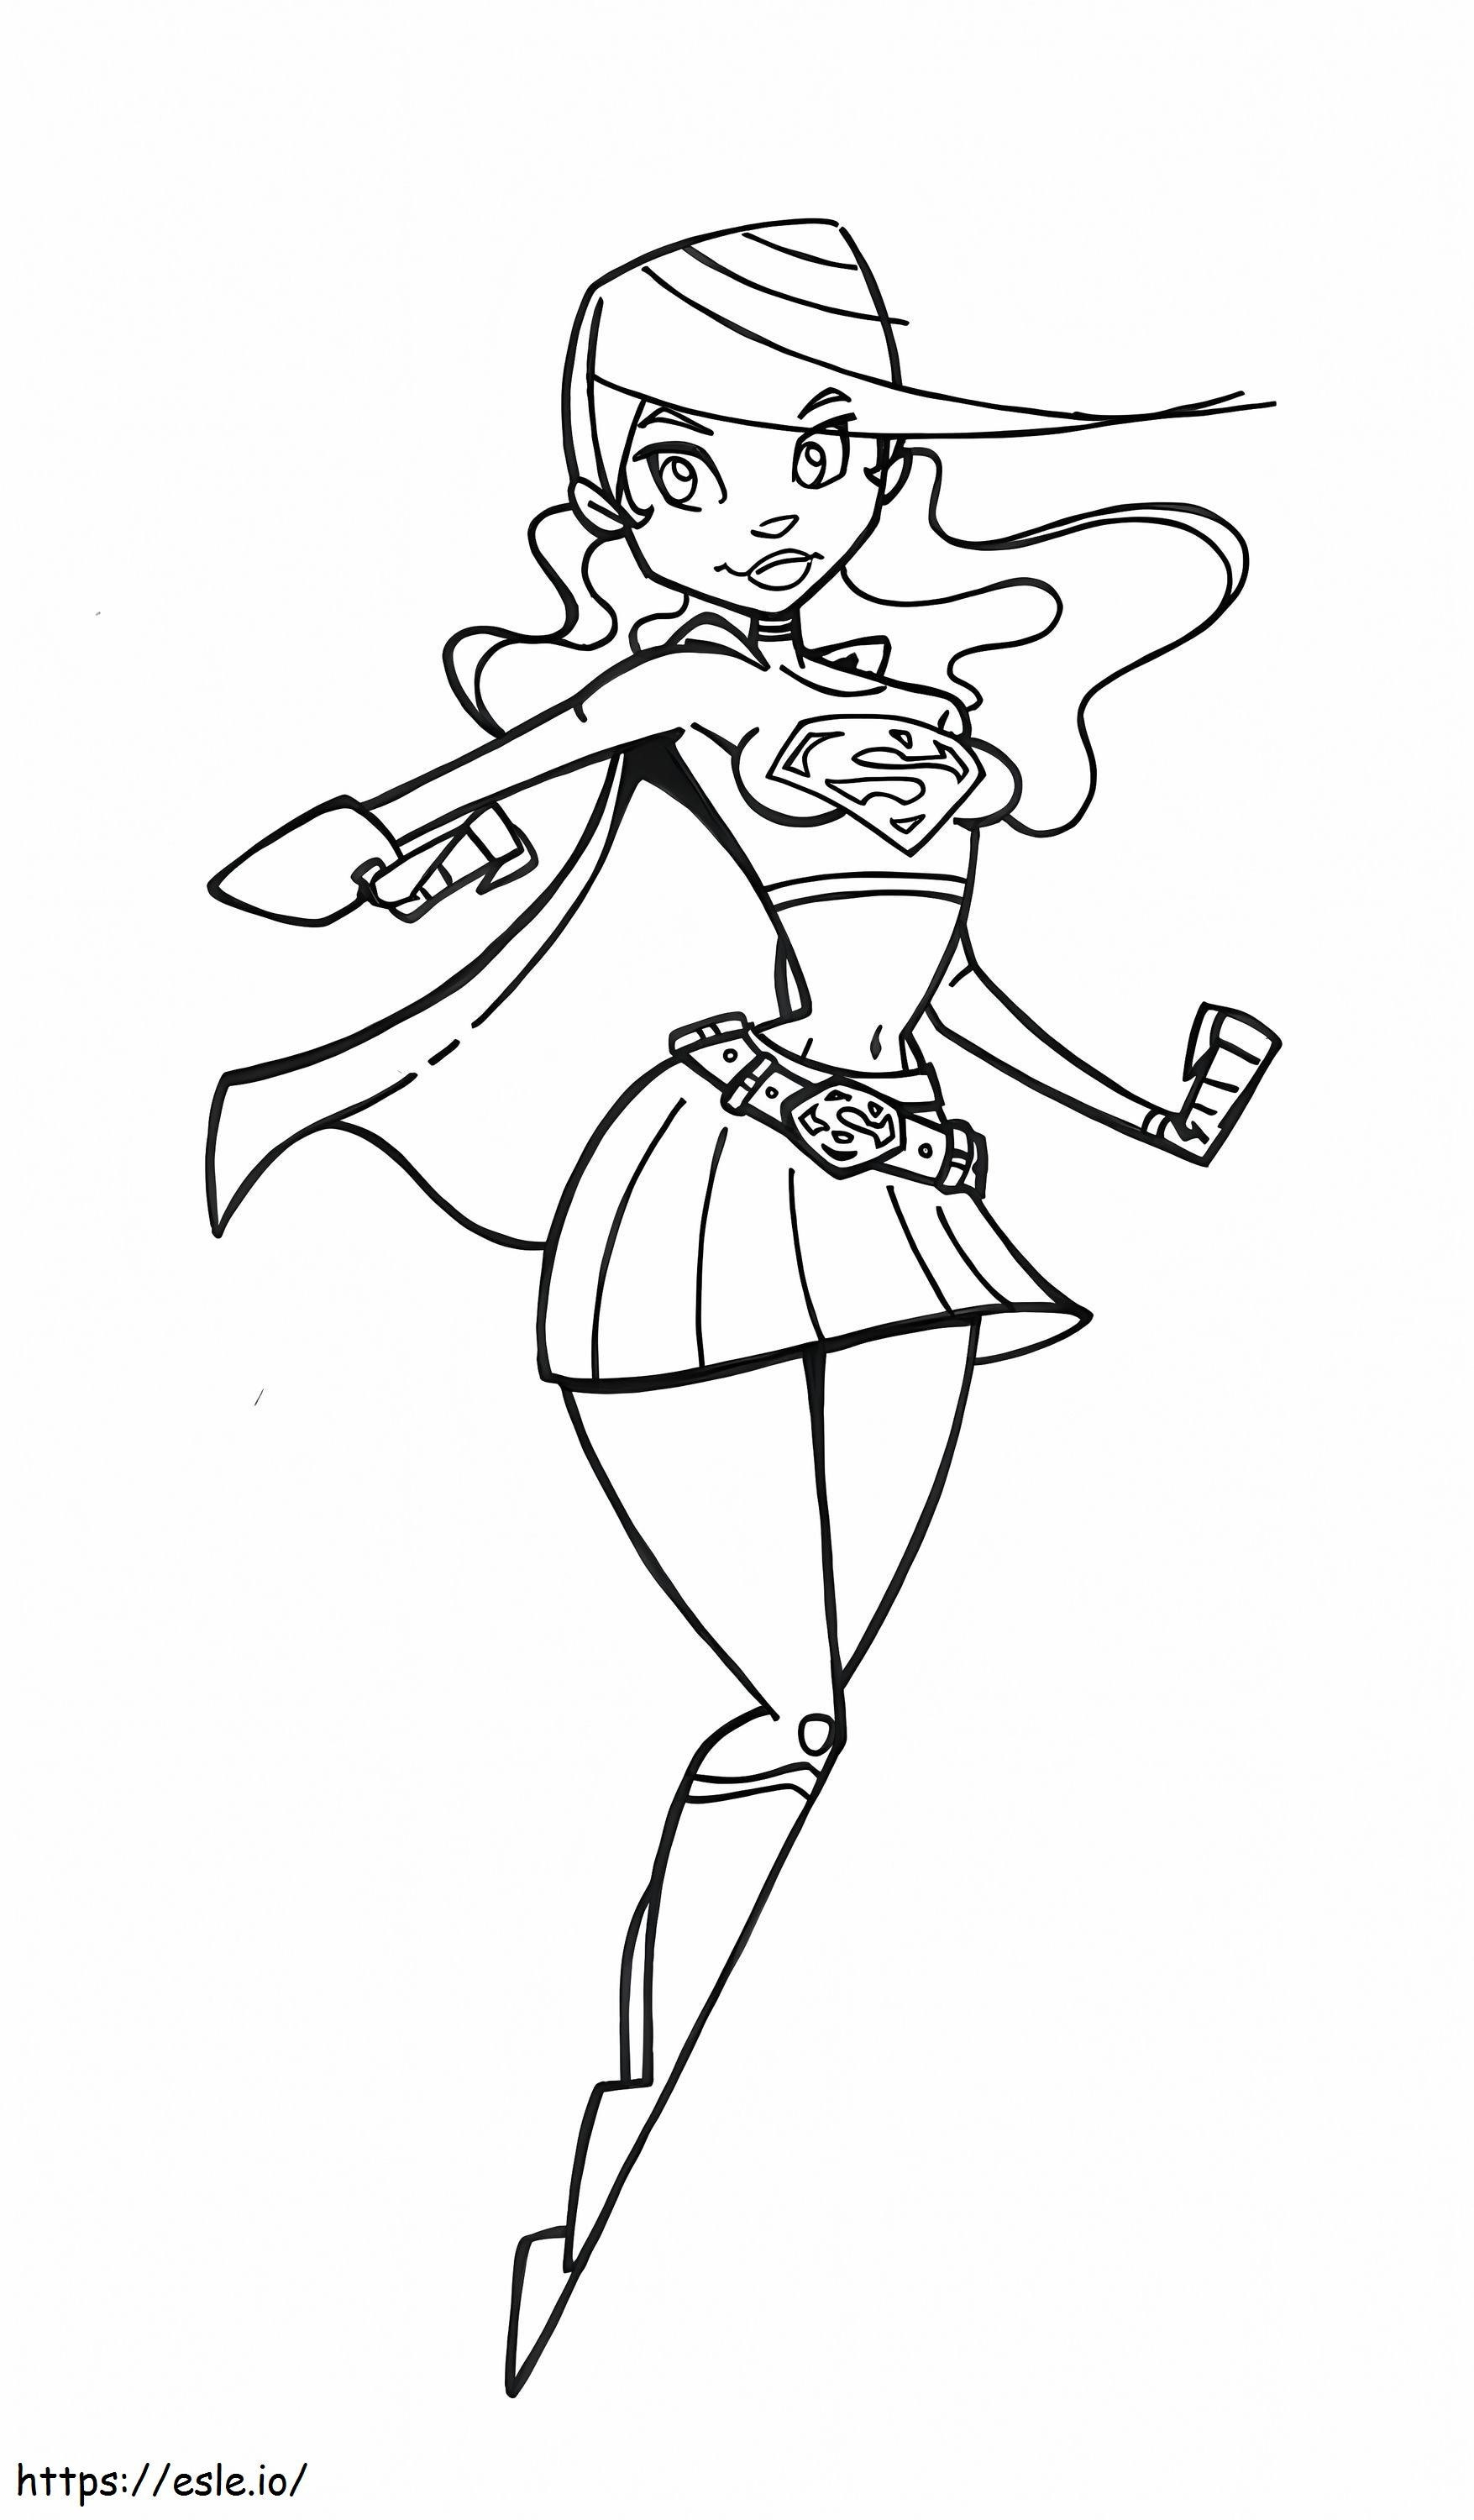 Awesome Supergirl coloring page